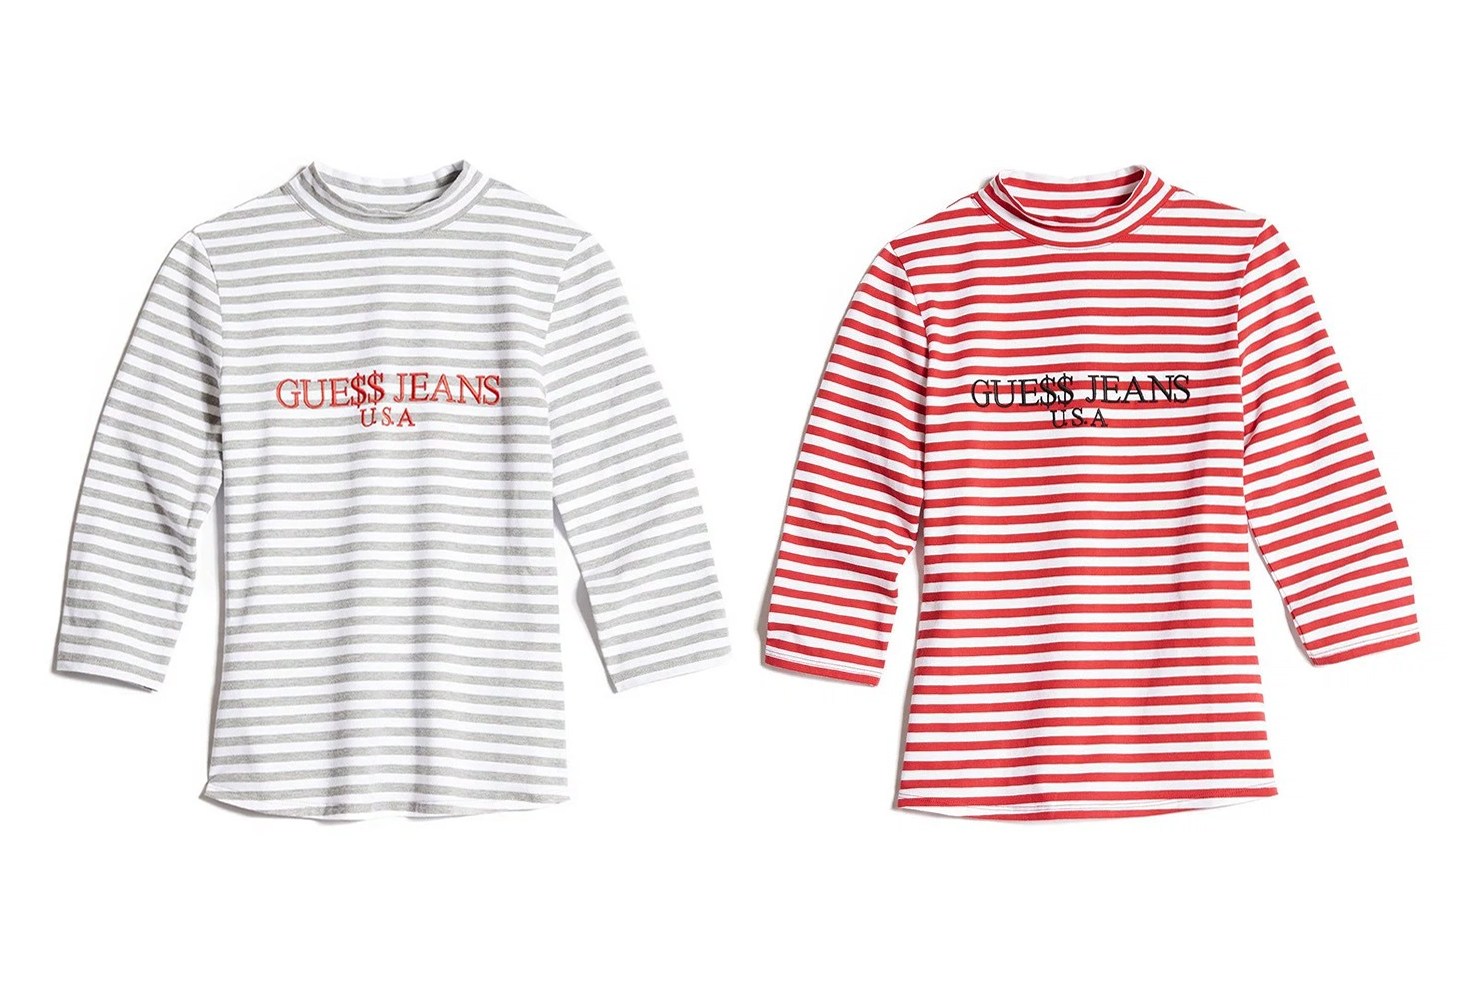 asap-rocky-guess-collaboration-003